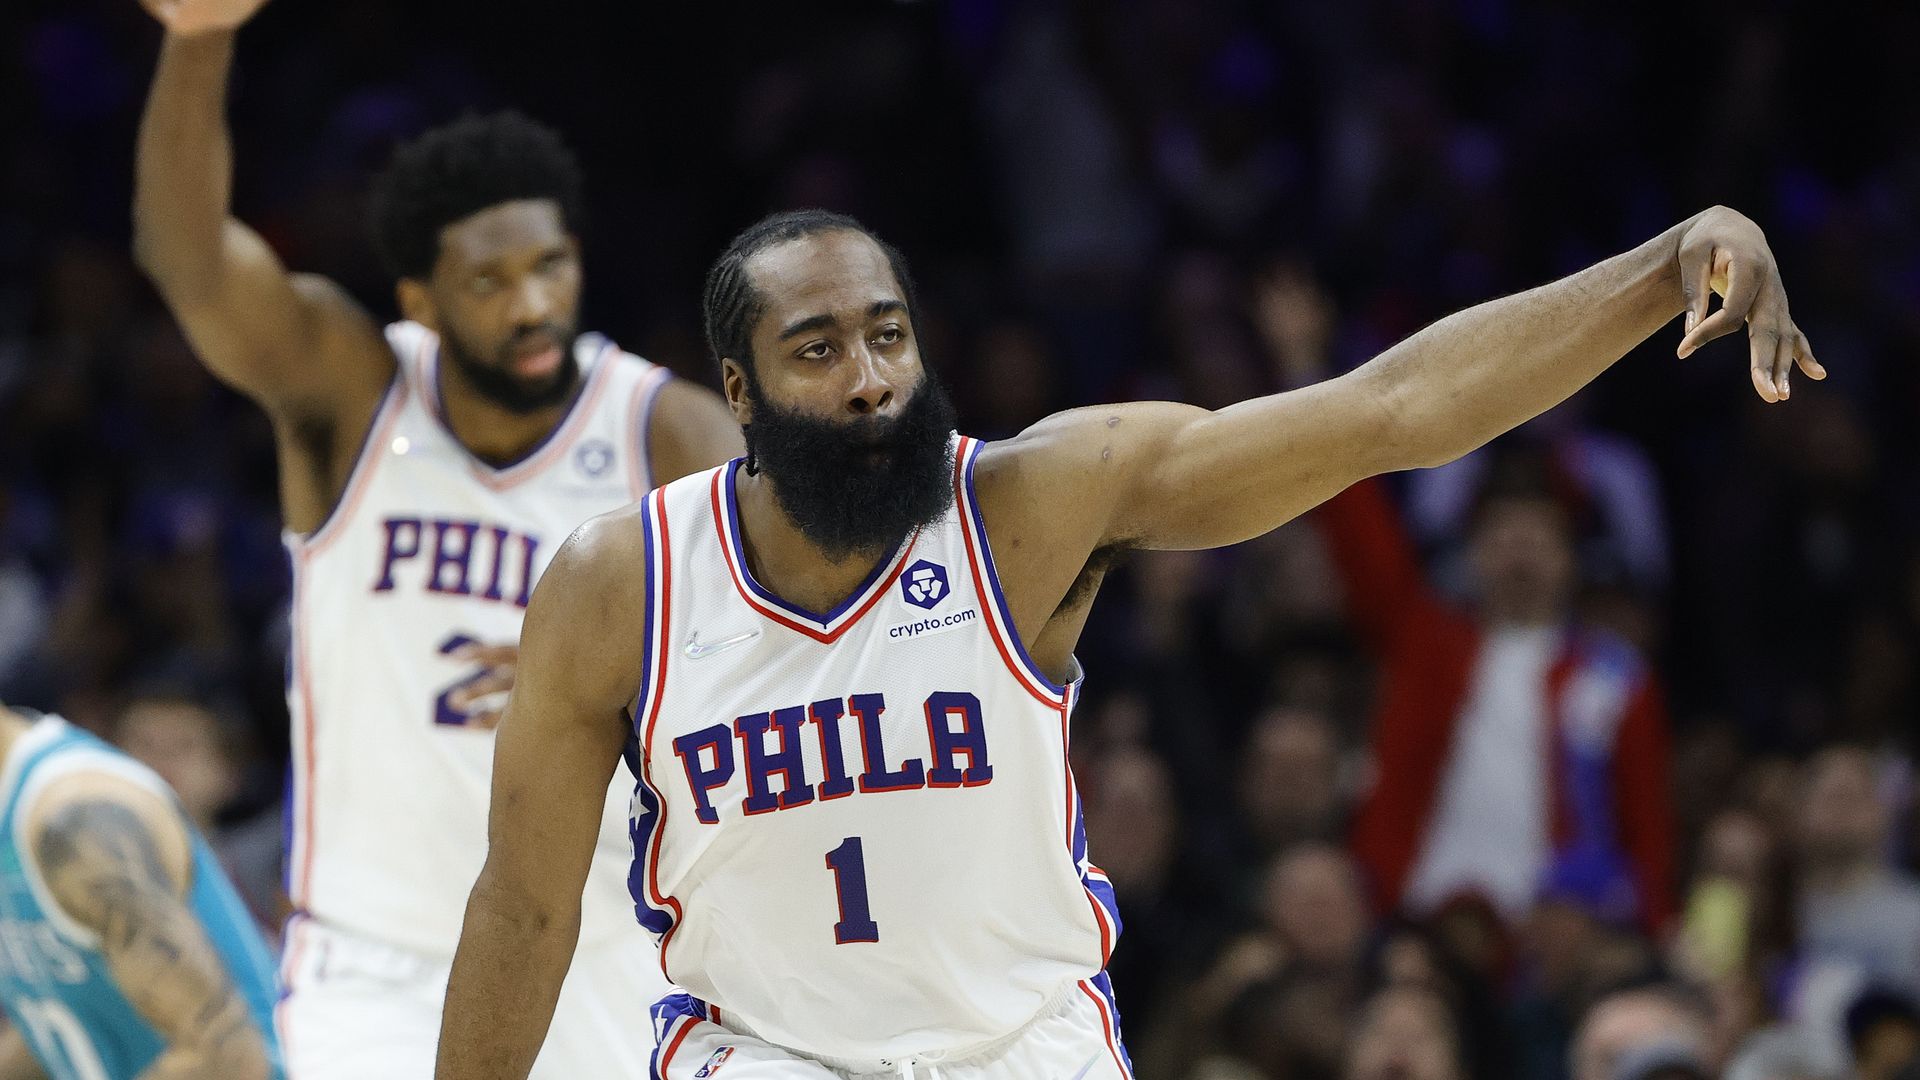 Sixers' stars James Harden and Joel Embiid